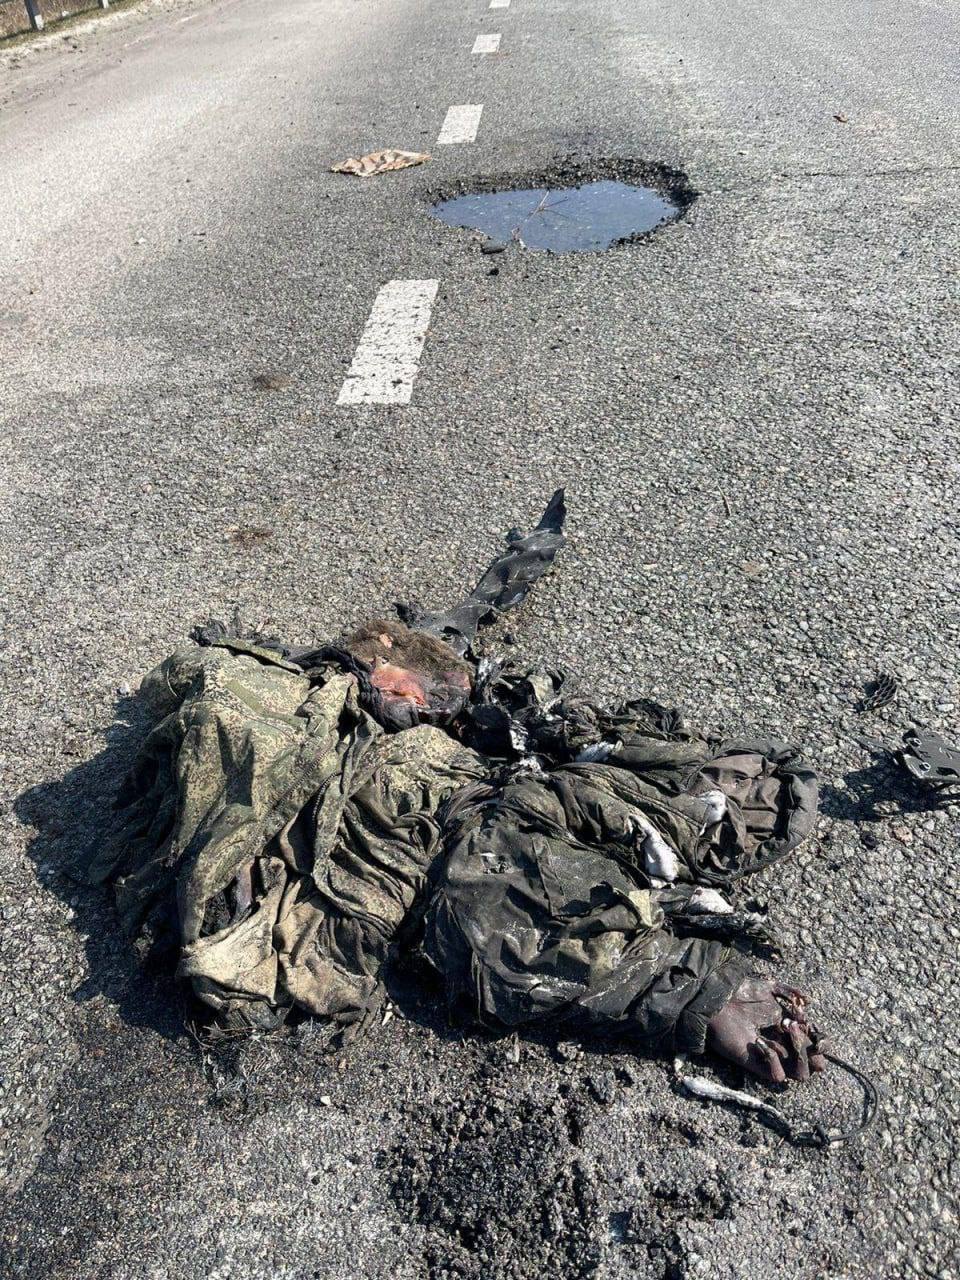 Unidentified remains in Russian military uniform